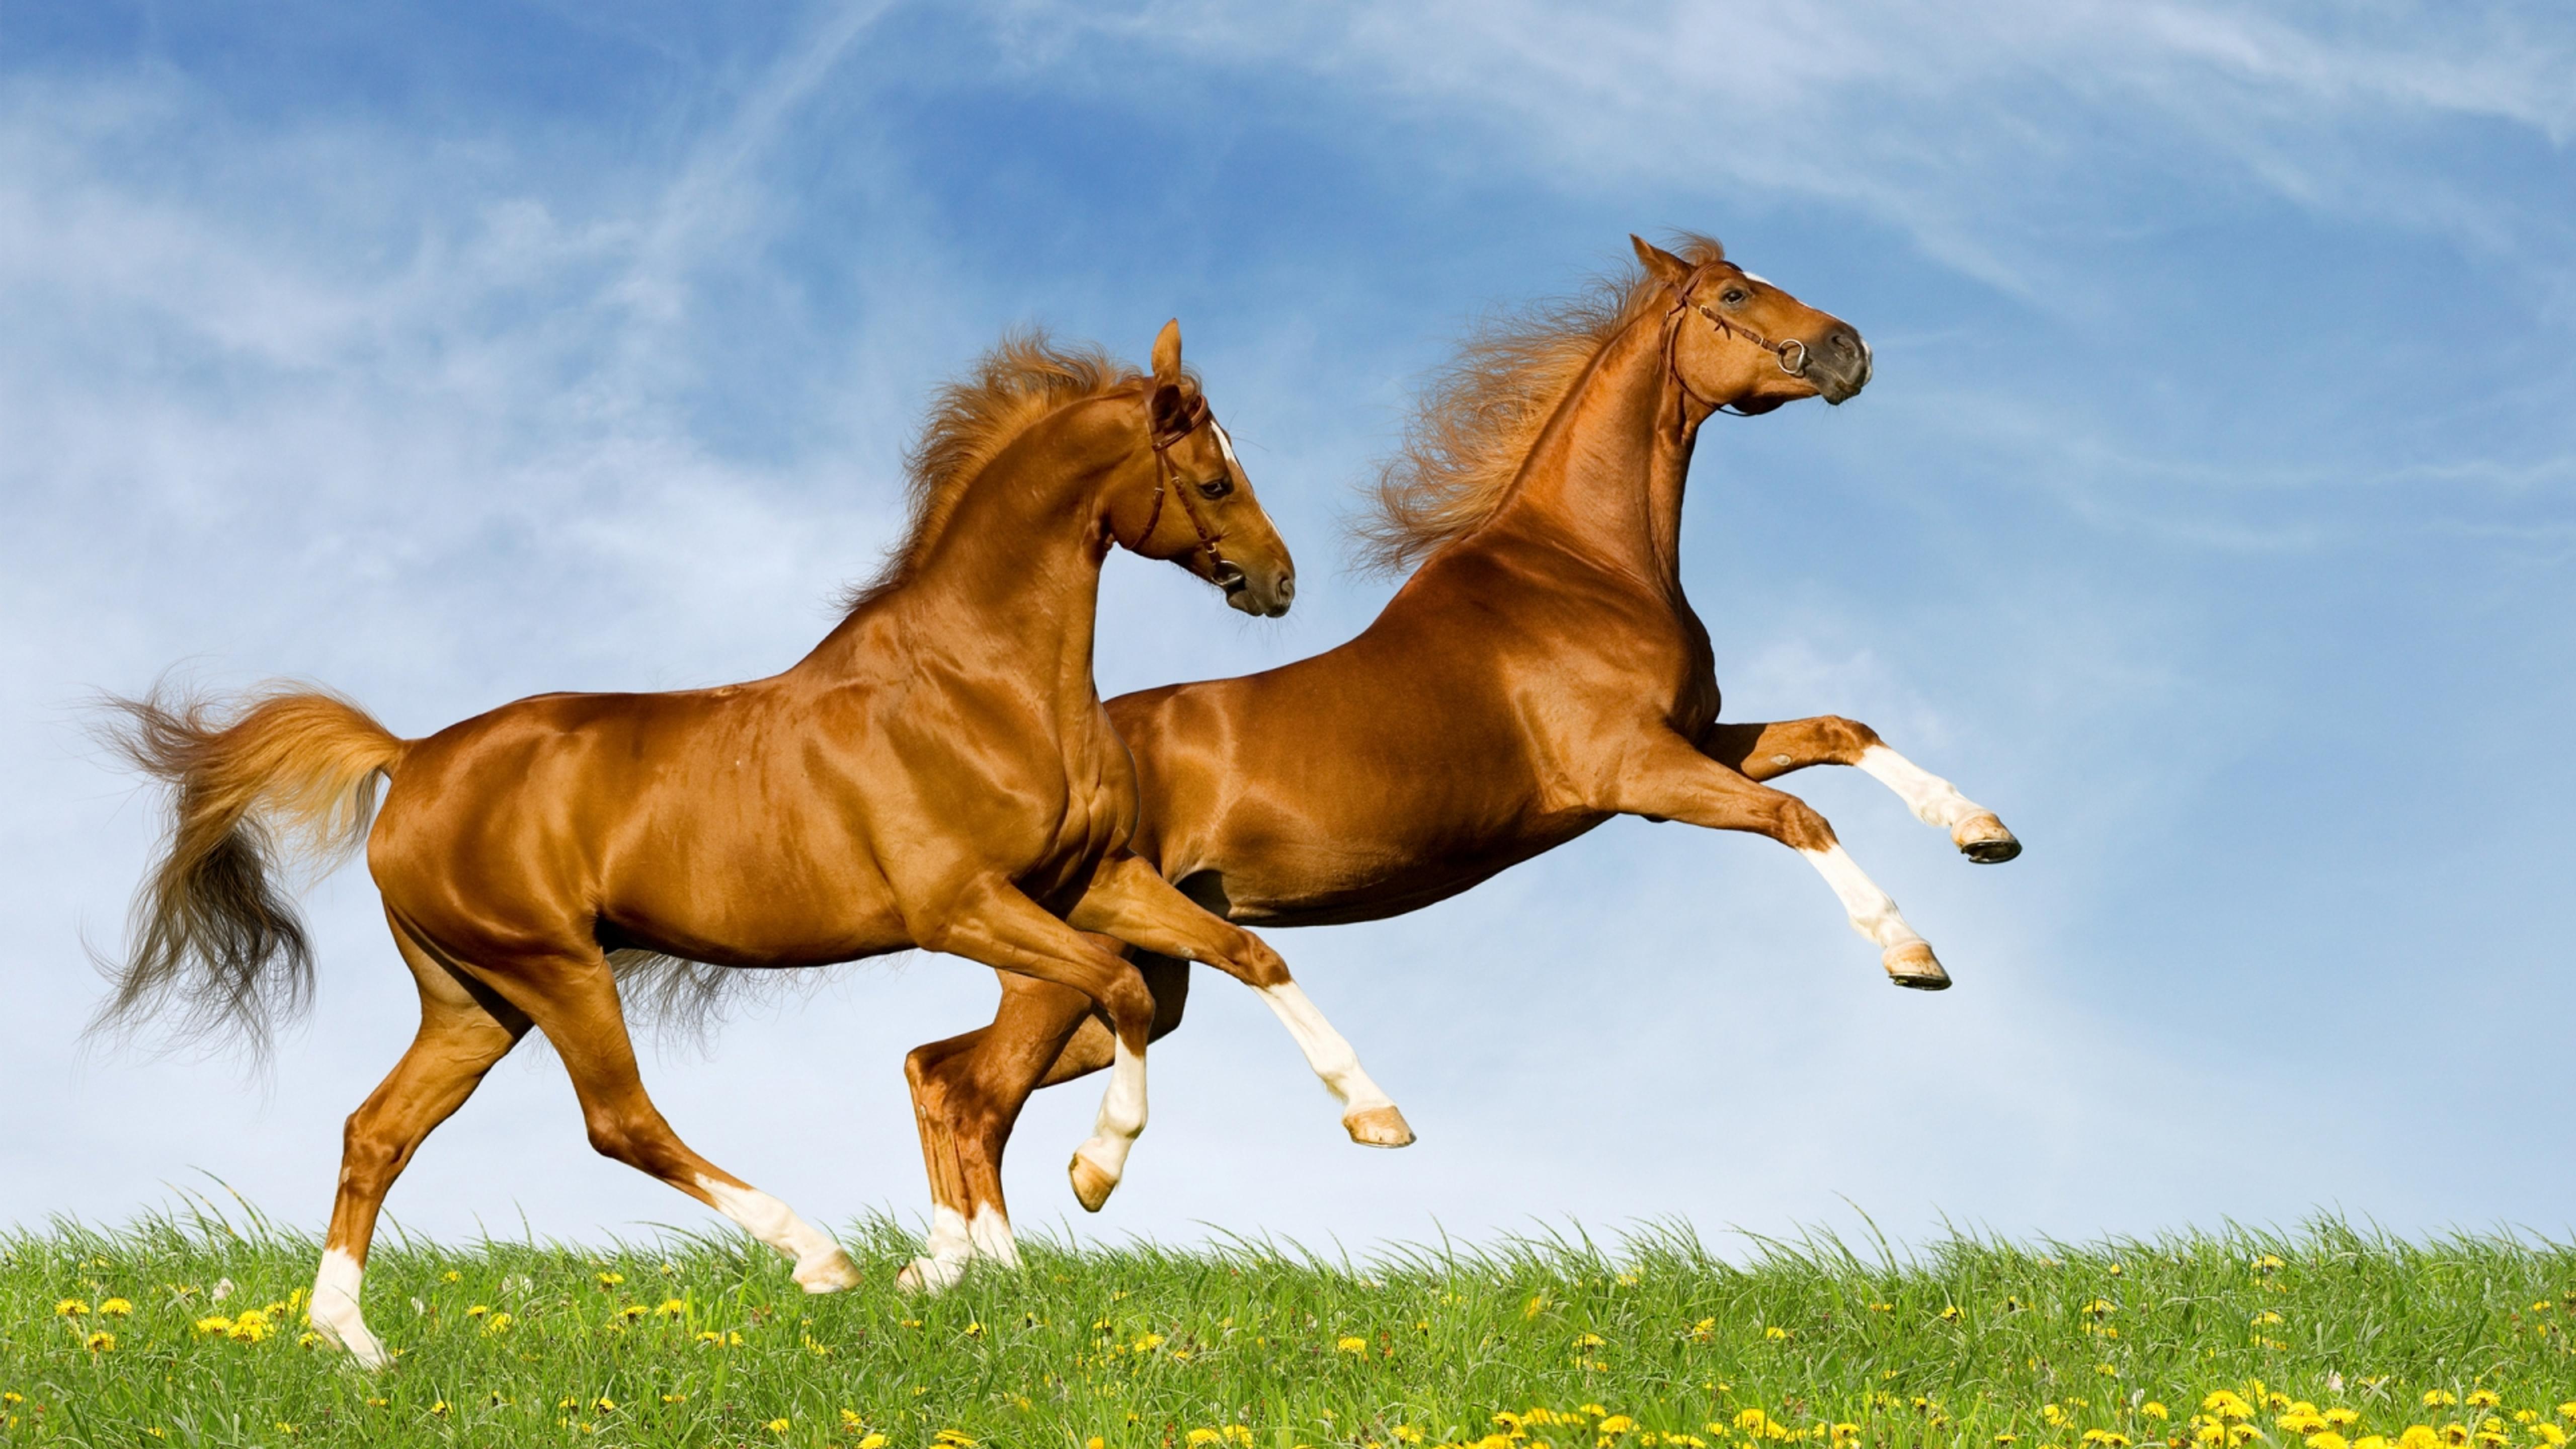 Two amazing horses running on the green field